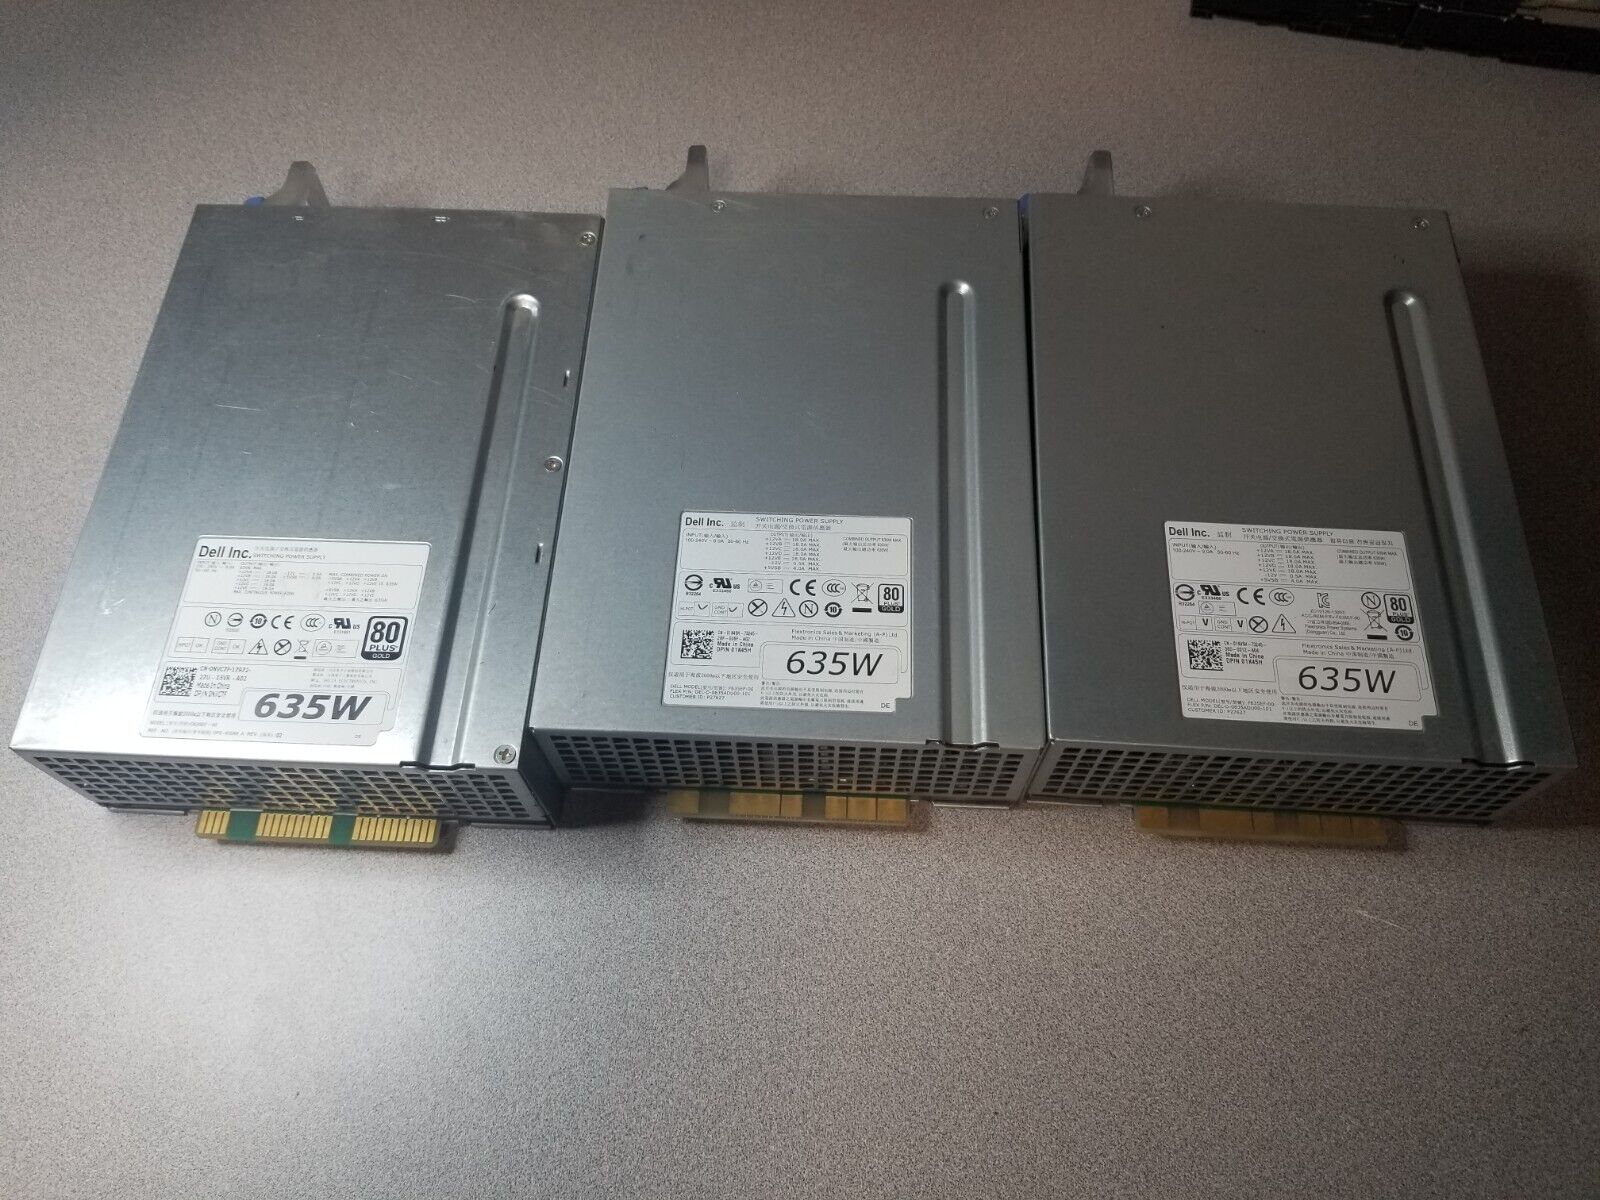 LOT OF 3 DELL PRECISION T3600 T5600 HOT SWAP 80+ POWER SUPPLIES - DPN 0NVC7F